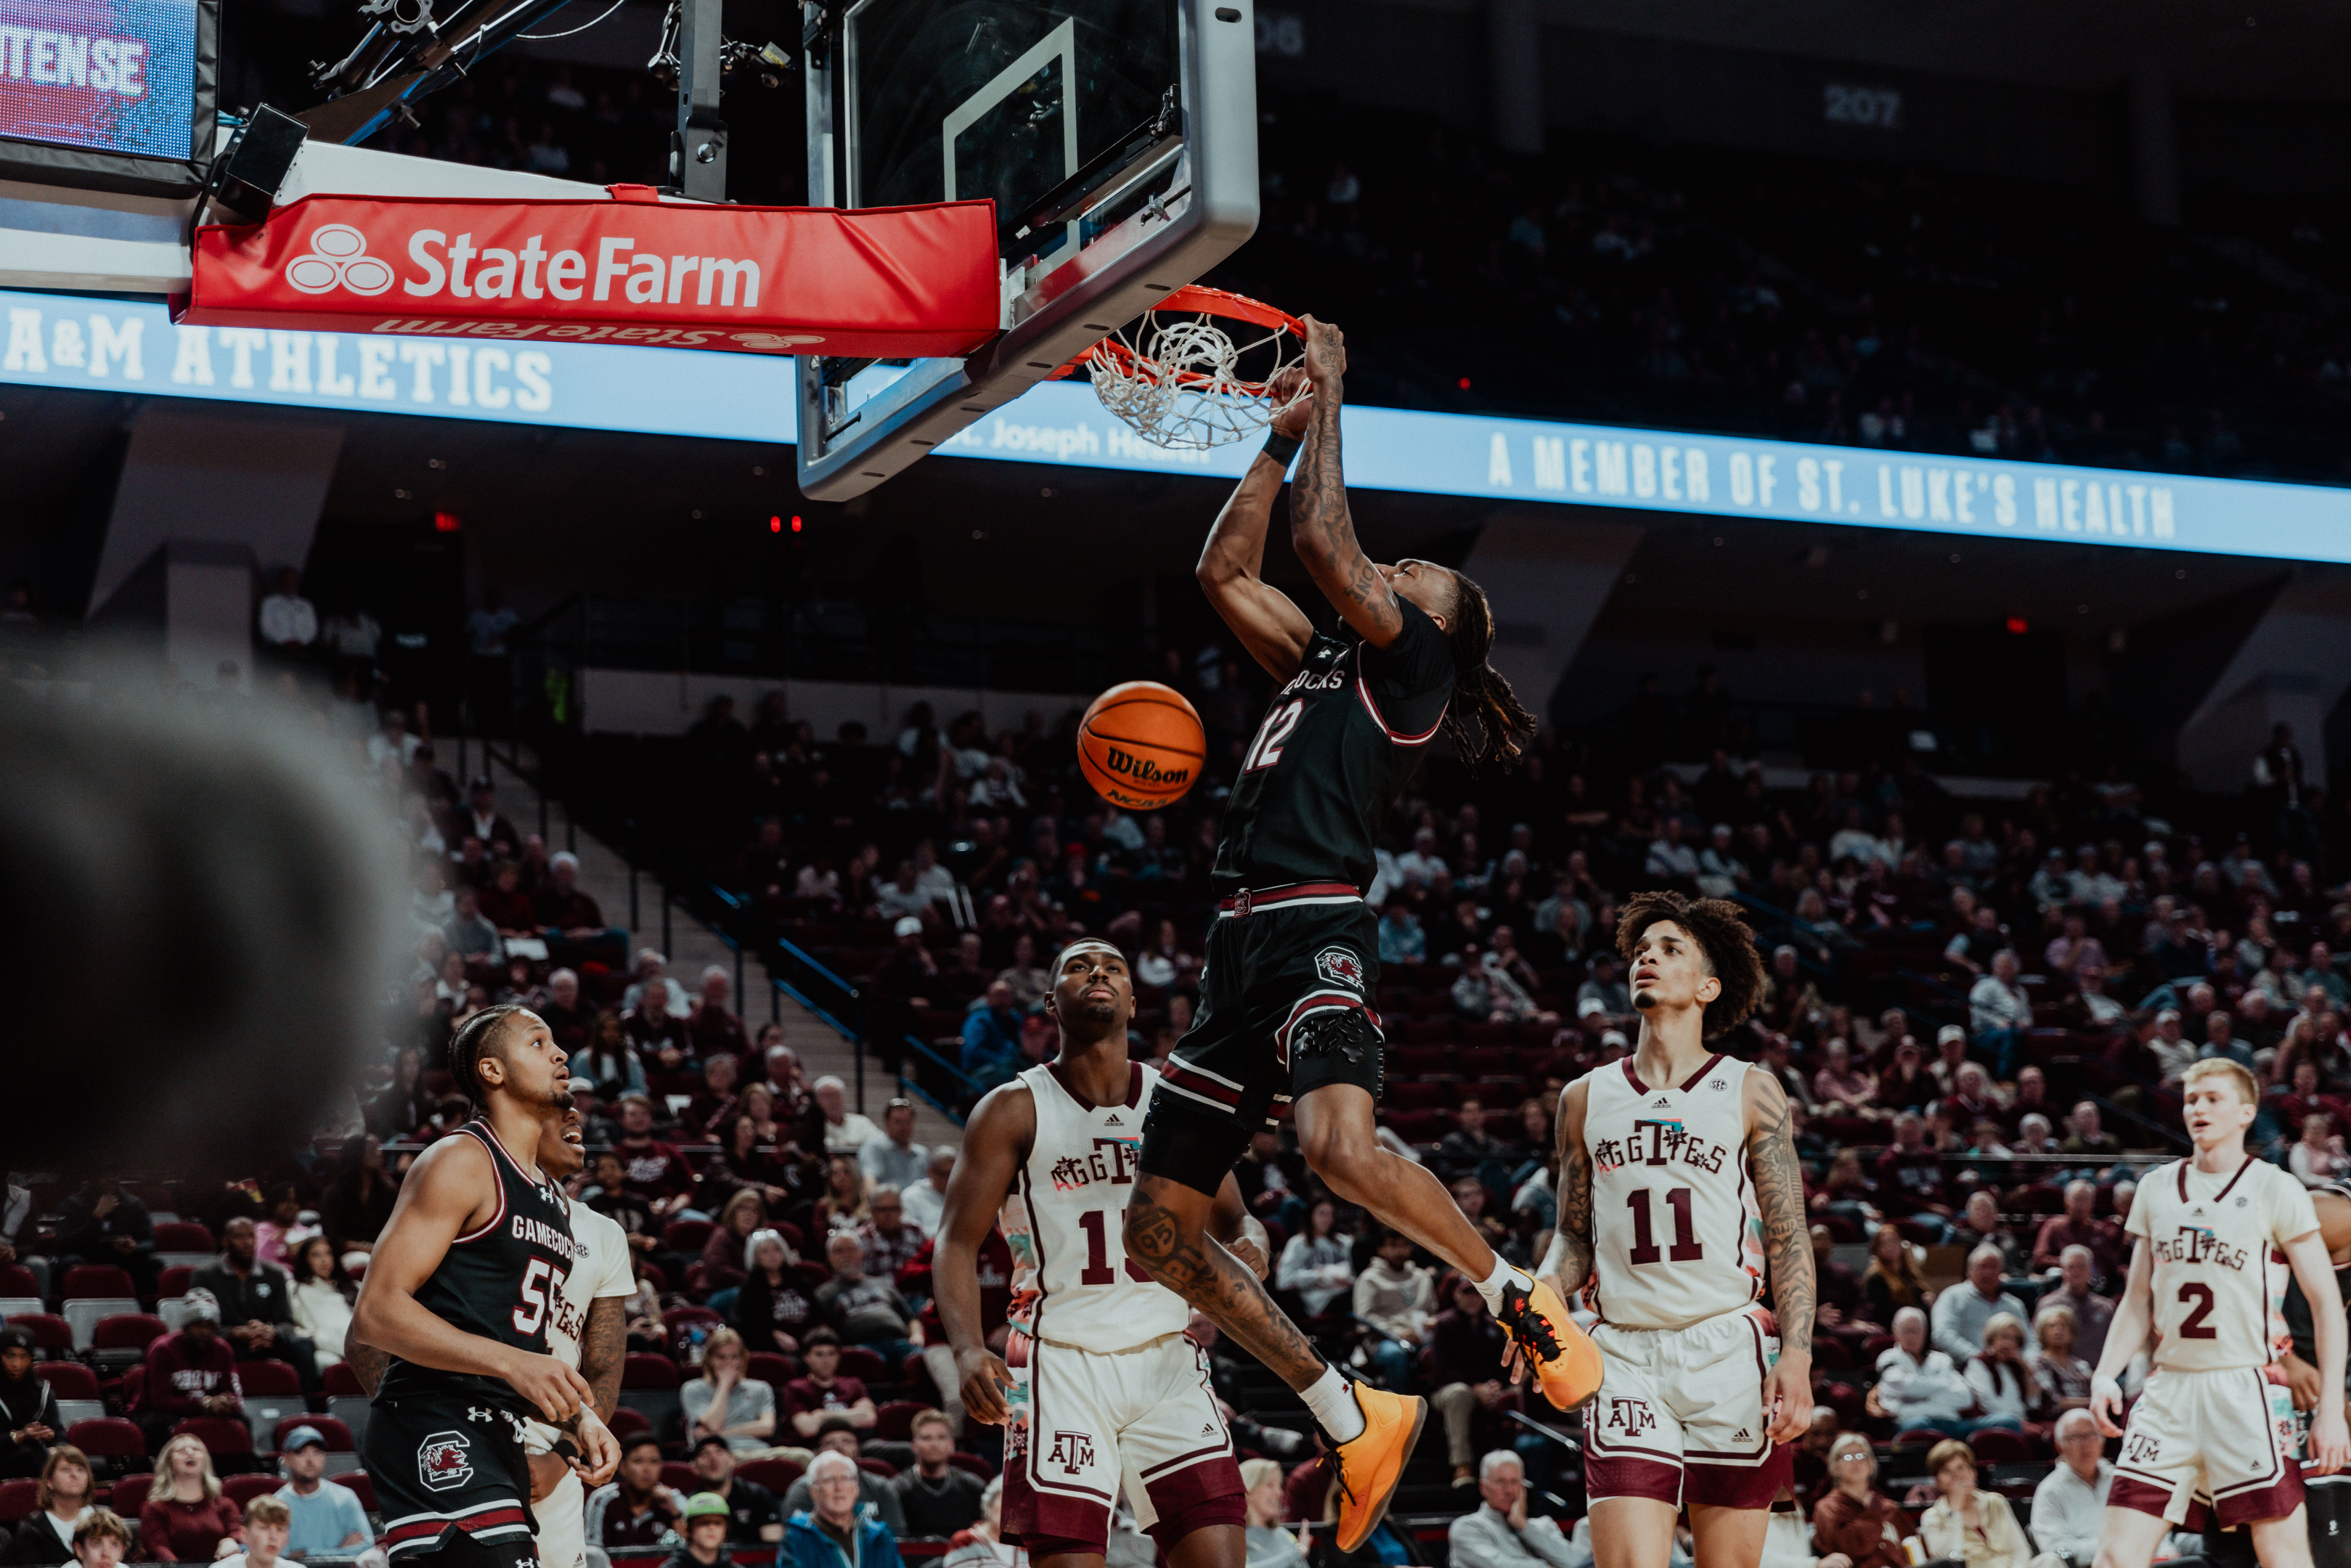 Davis scores on layup with 3 seconds left, giving No. 18/18 South Carolina a 70-68 win over Texas A&M